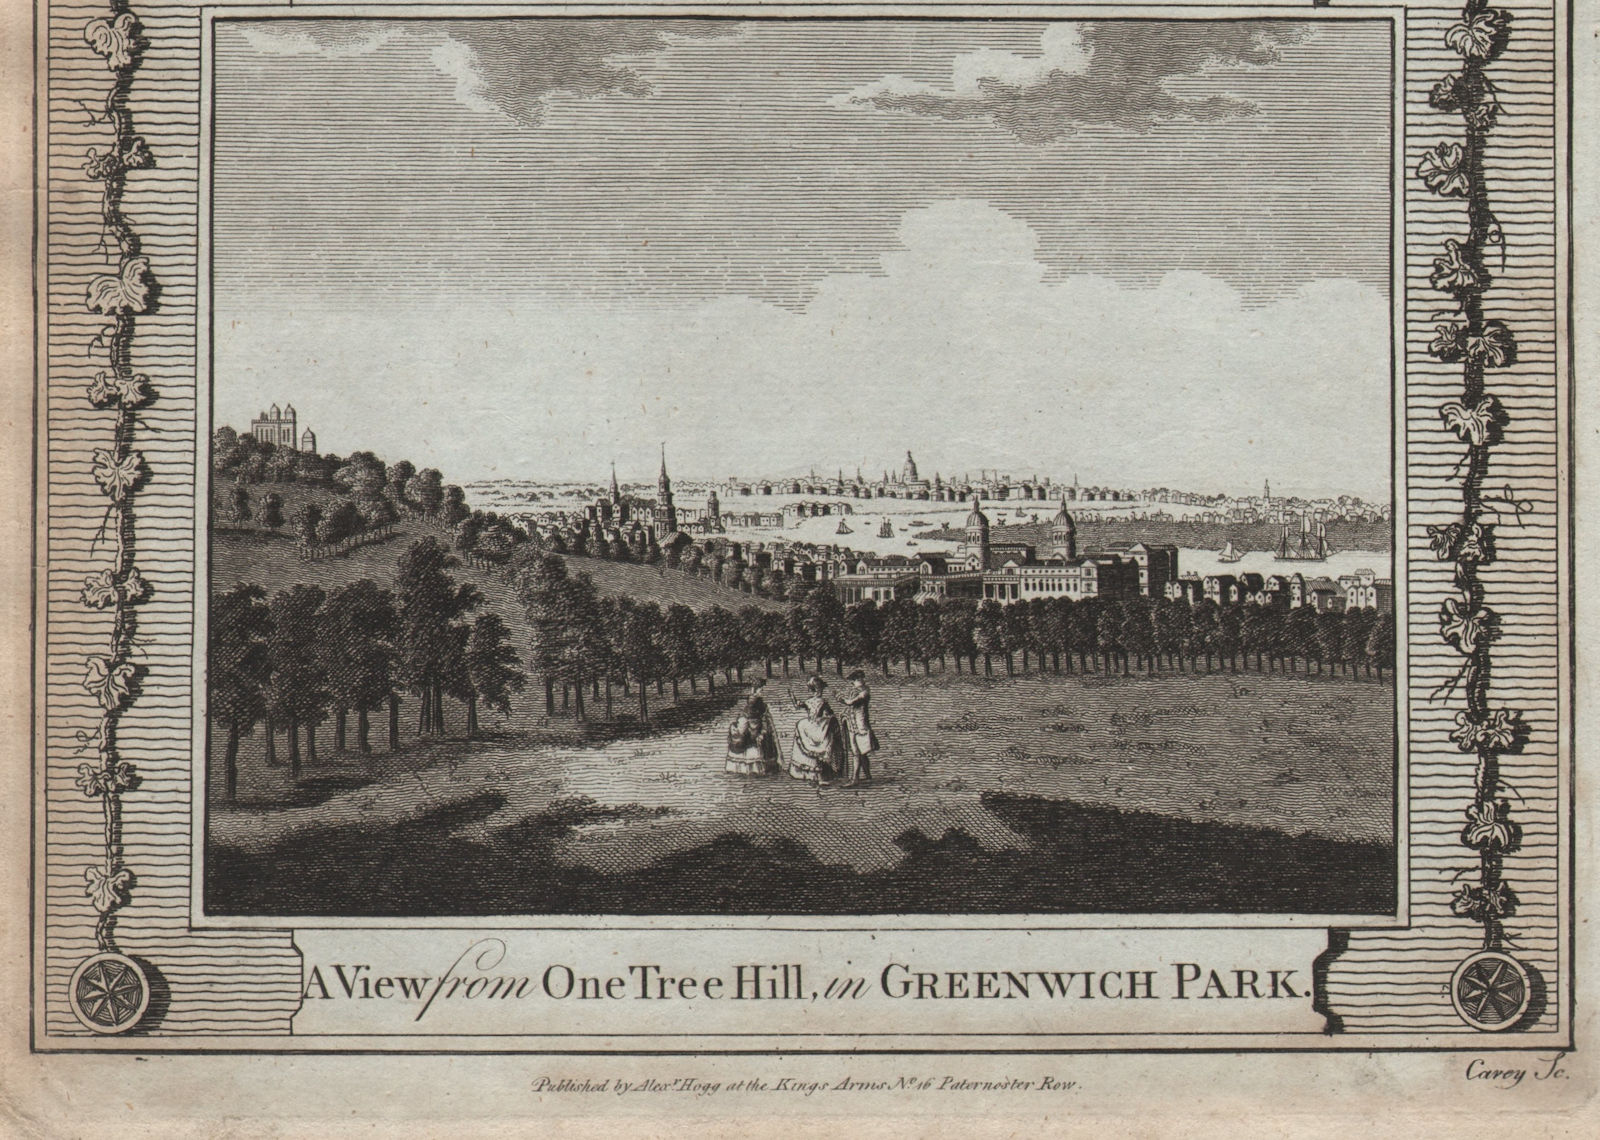 Associate Product Greenwich & the City of London from Greenwich Park. Observatory. THORNTON 1784